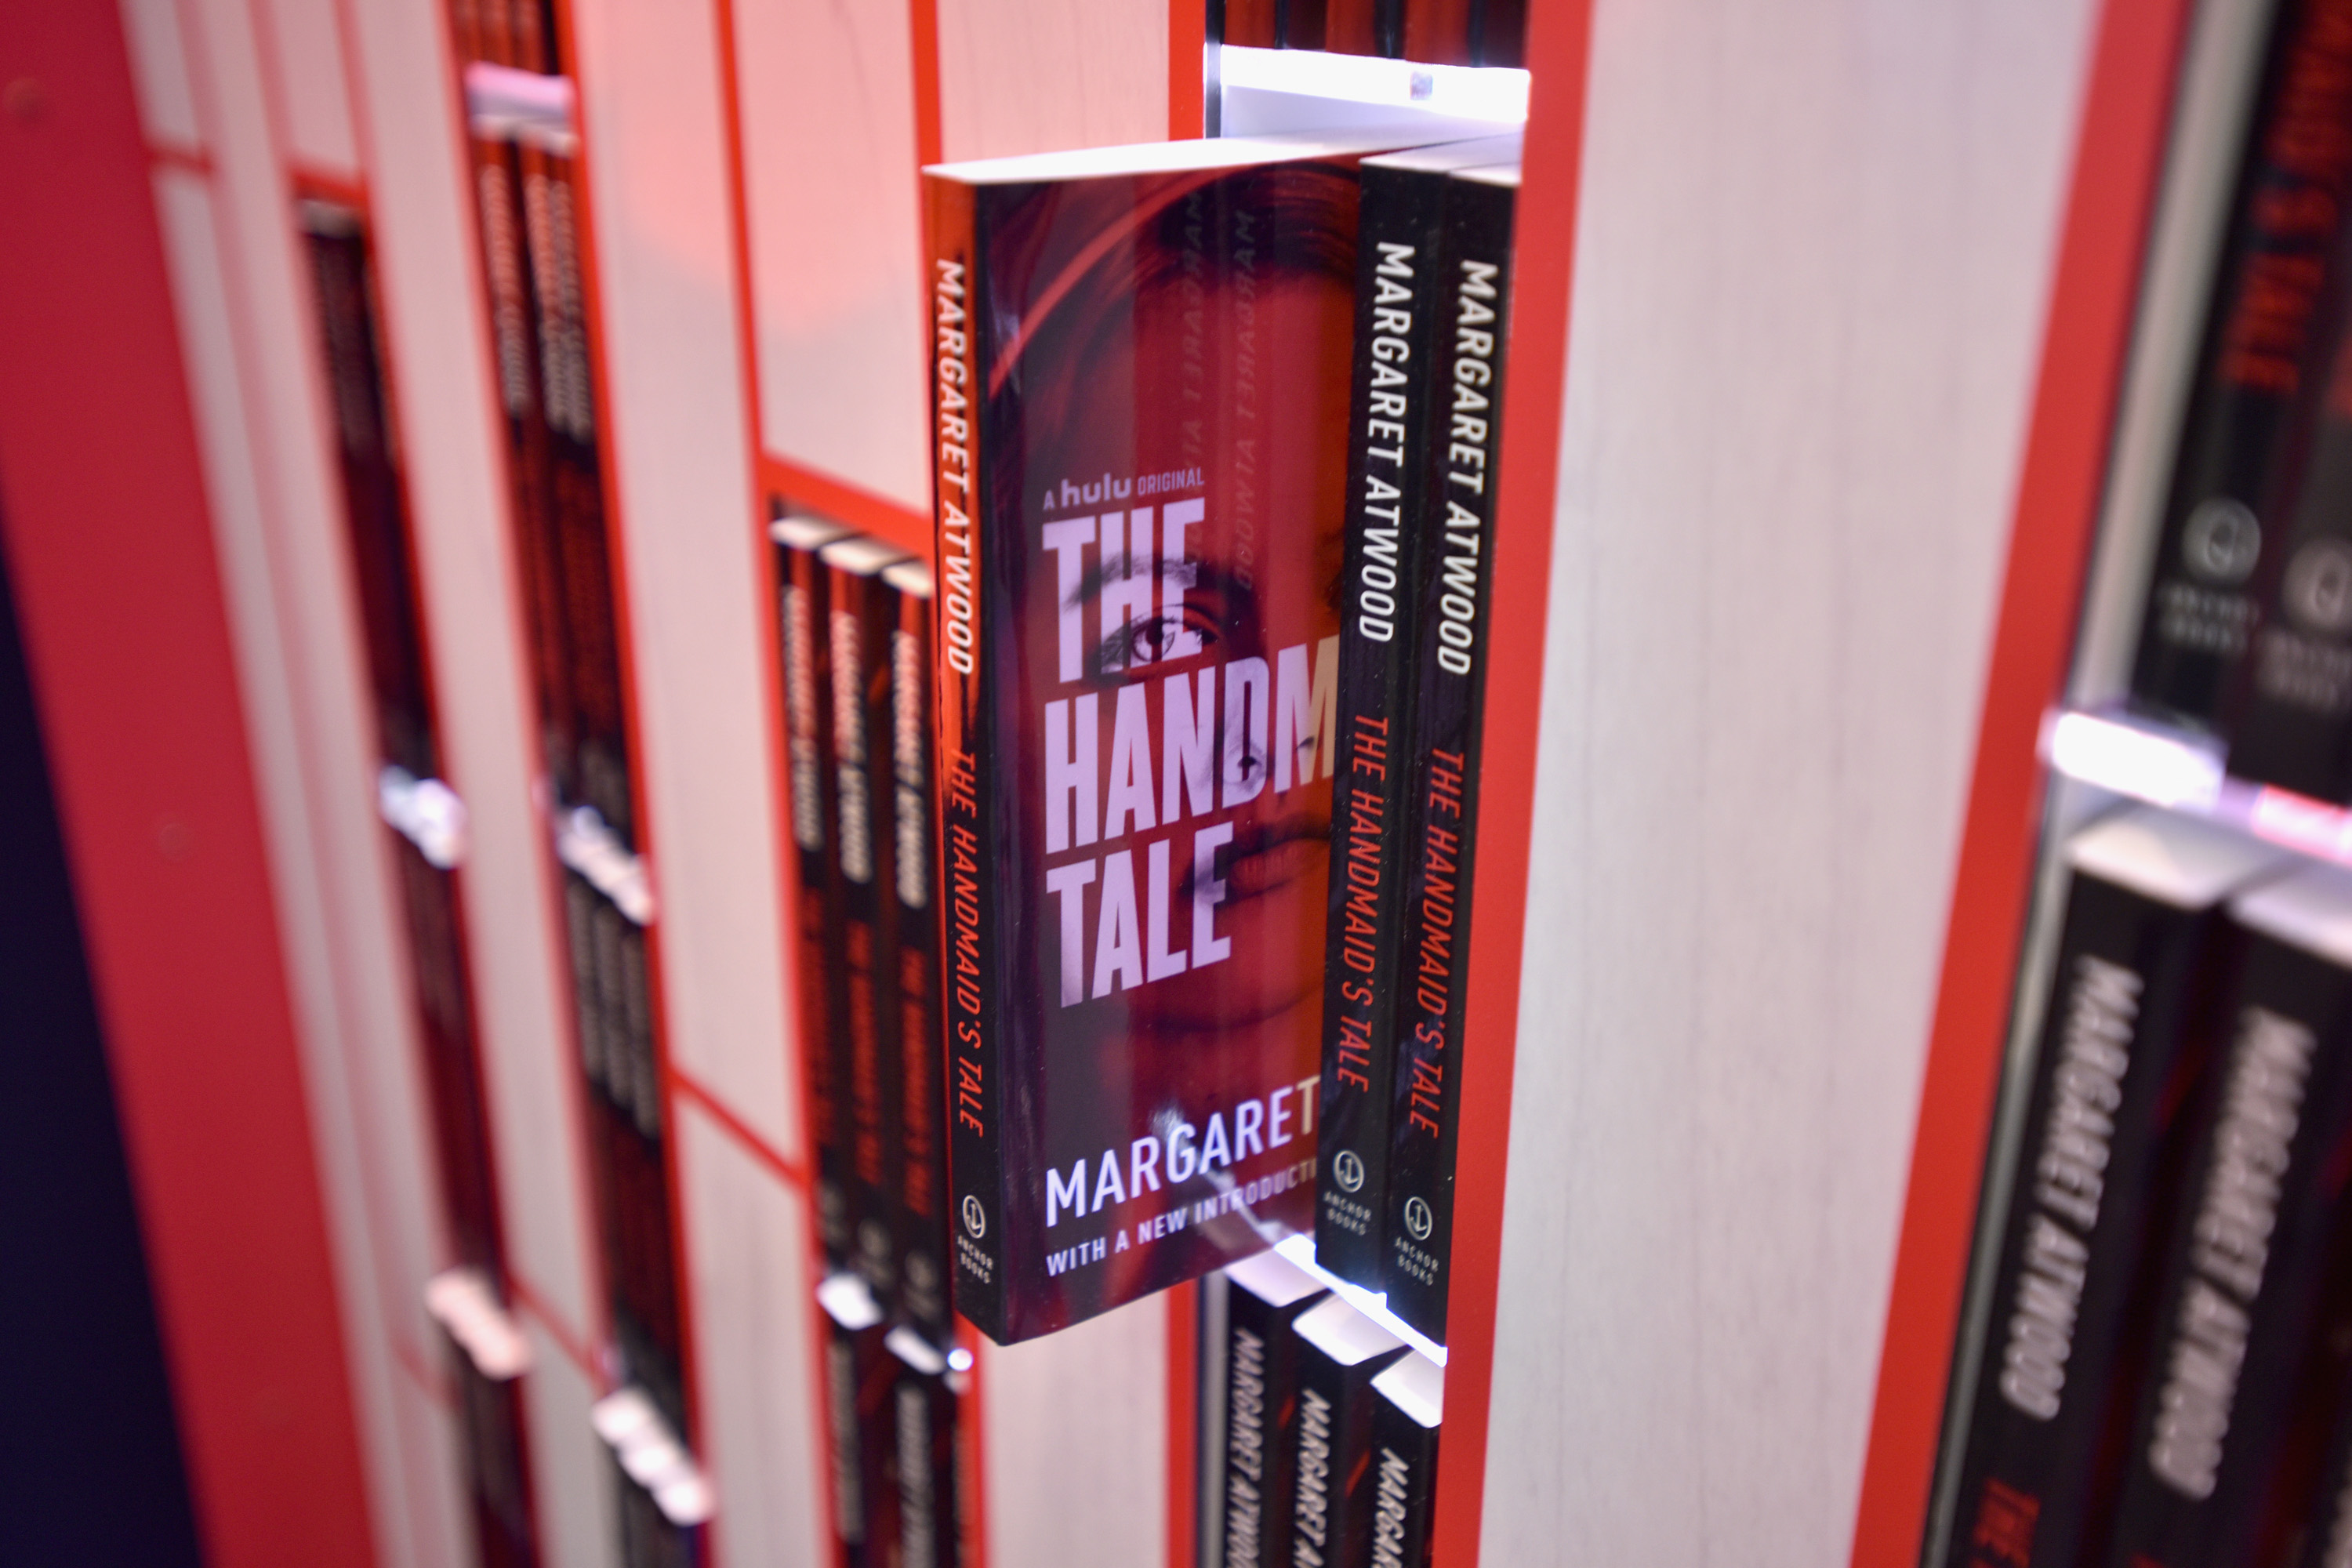 Copies of Margaret Atwood's book 'The Handmaid's Tale' sticking on shelves